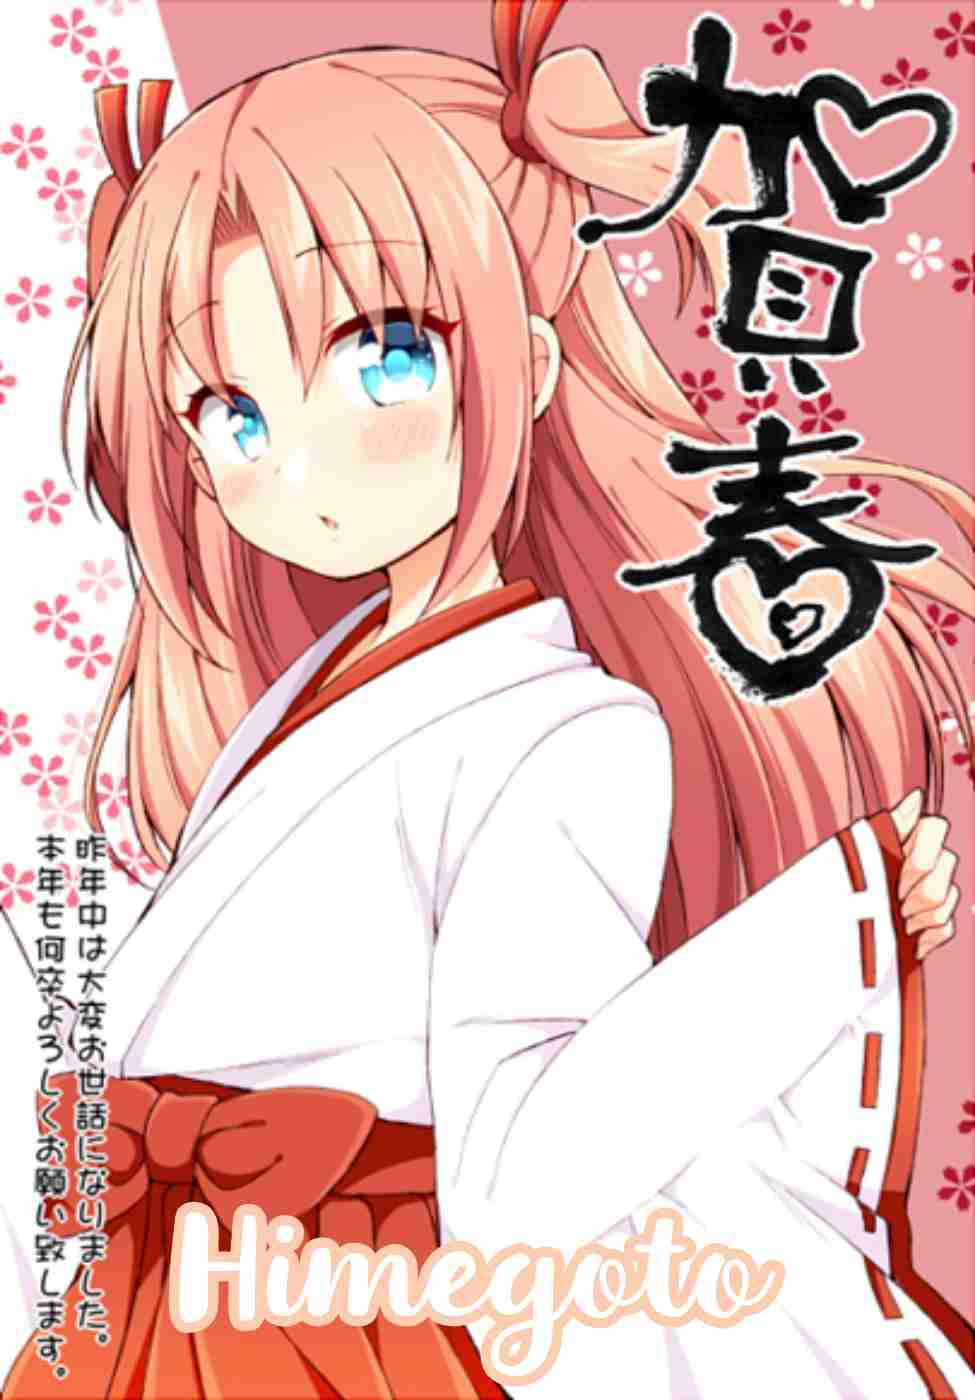 HIMEGOTO ( TỪ CHAPTER 17 ĐẾN HẾT ) (COMPLETED)